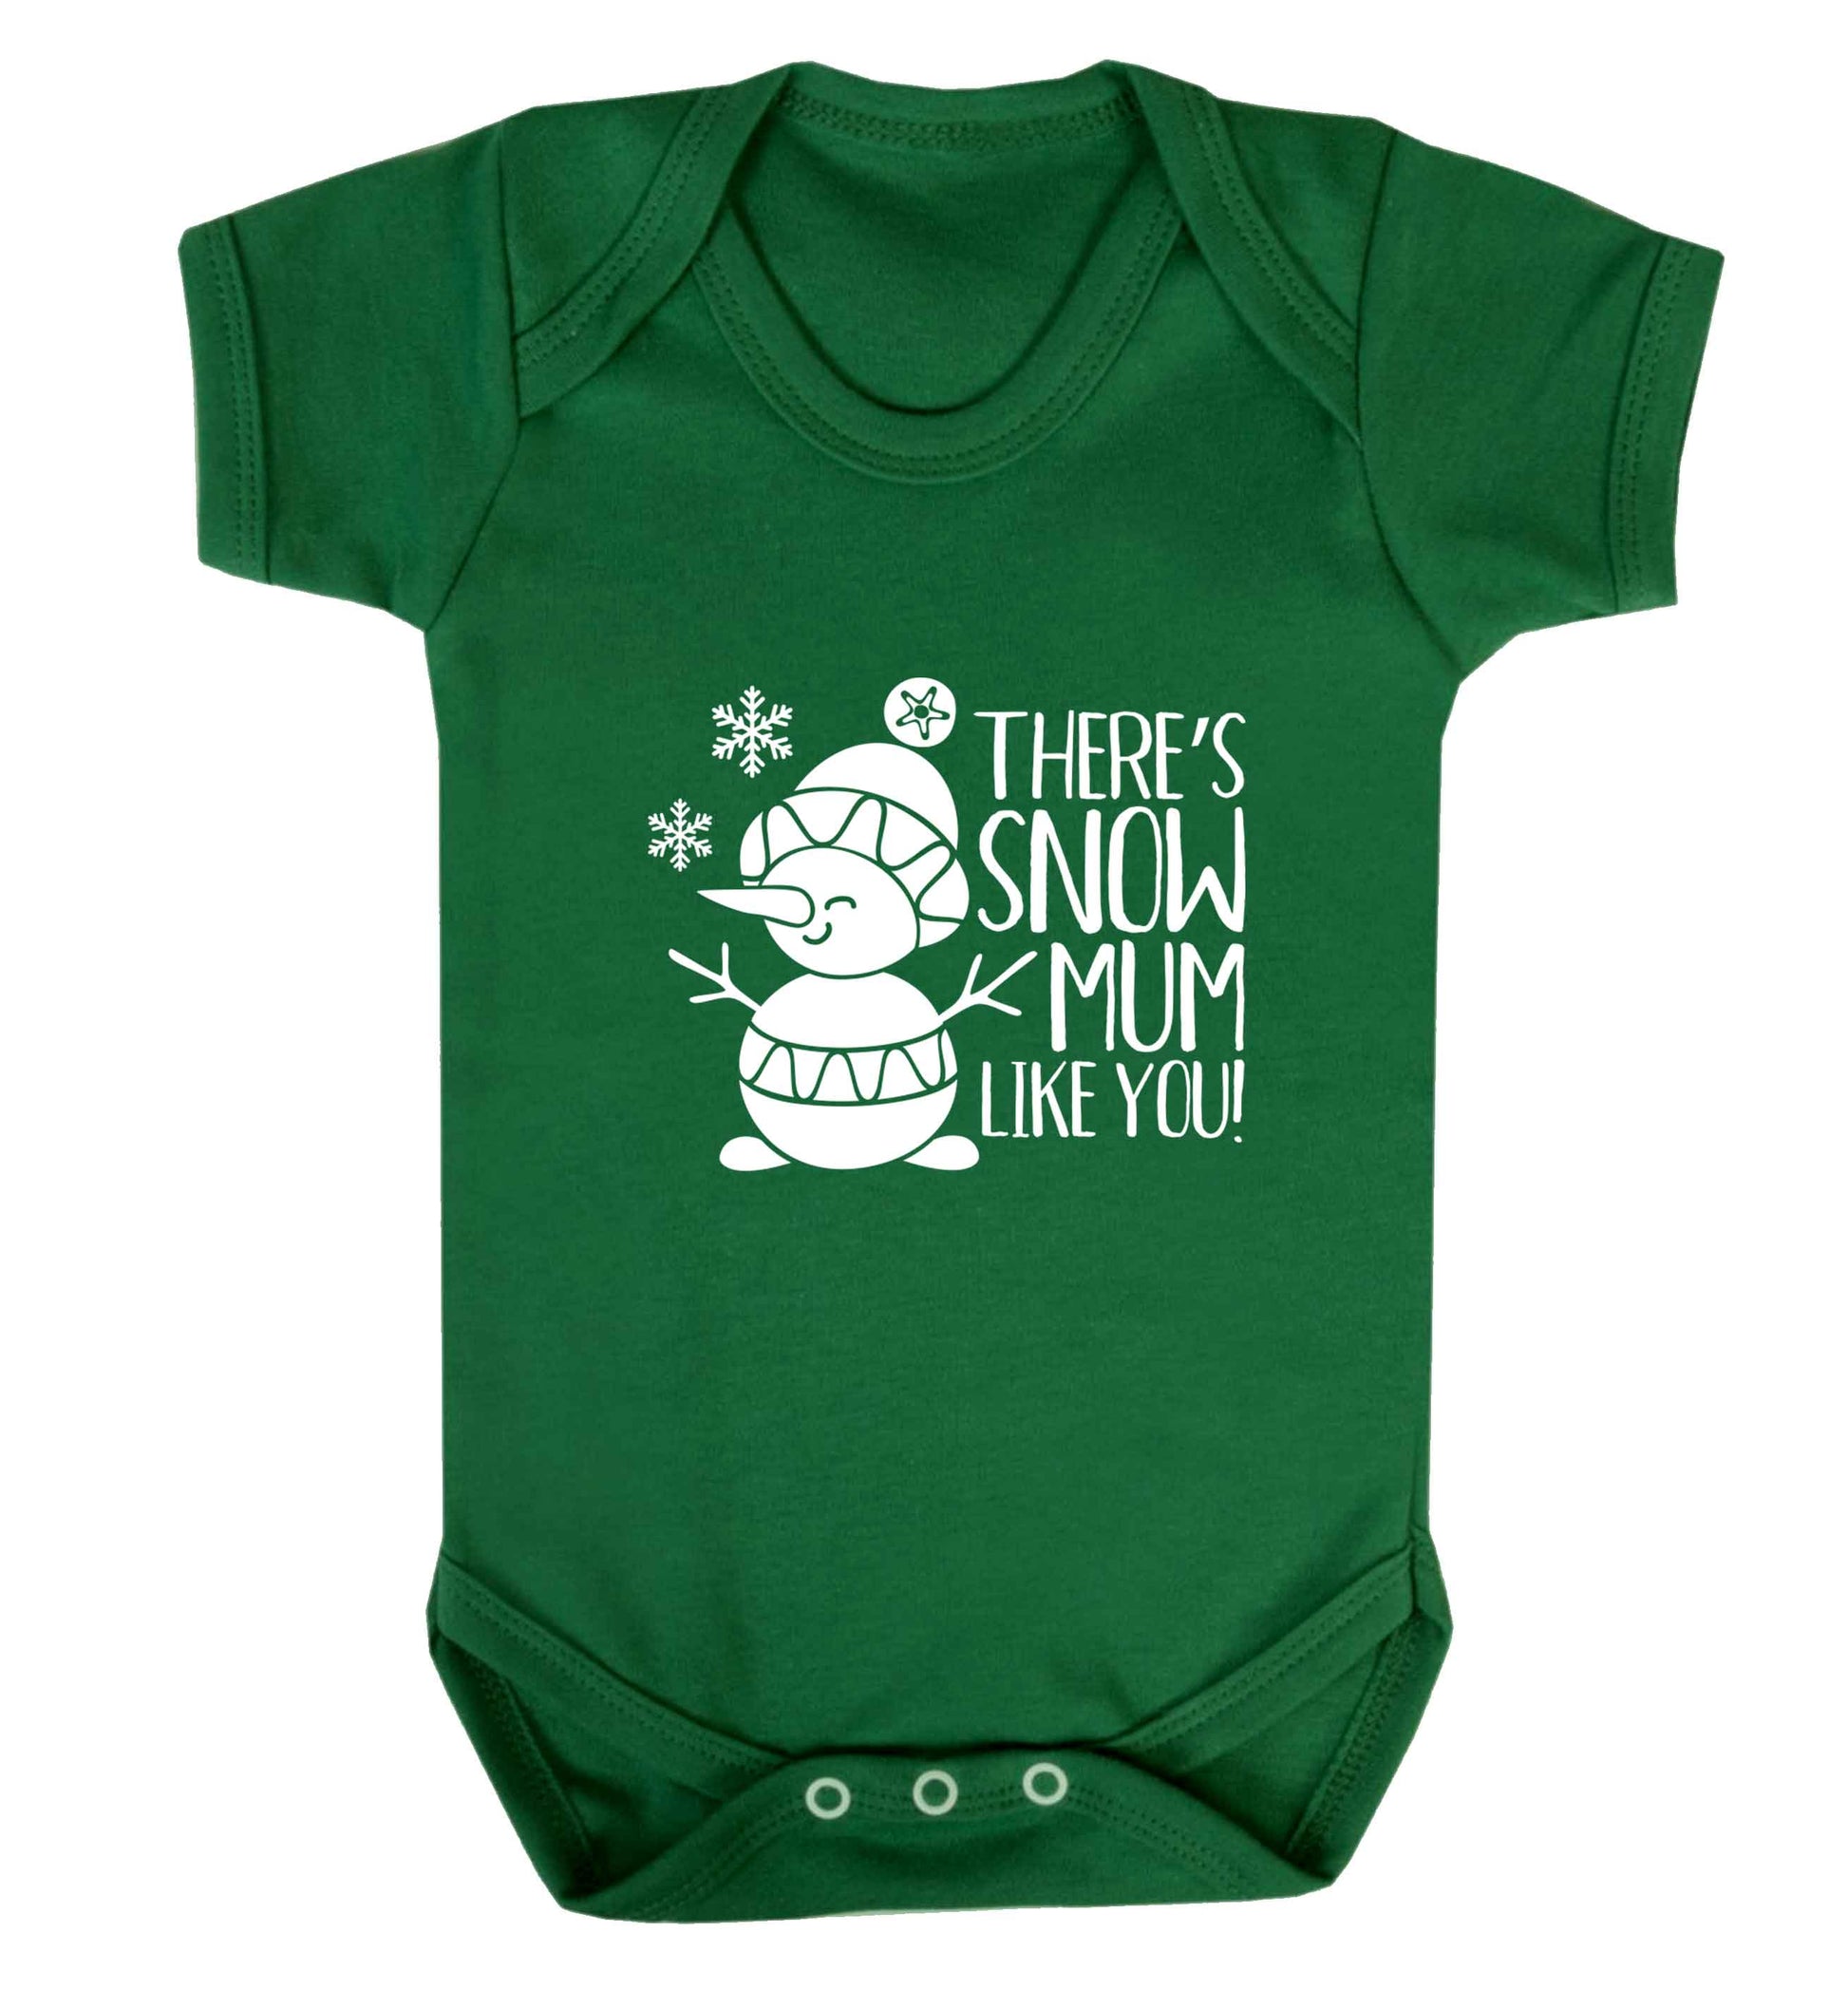 There's snow mum like you baby vest green 18-24 months